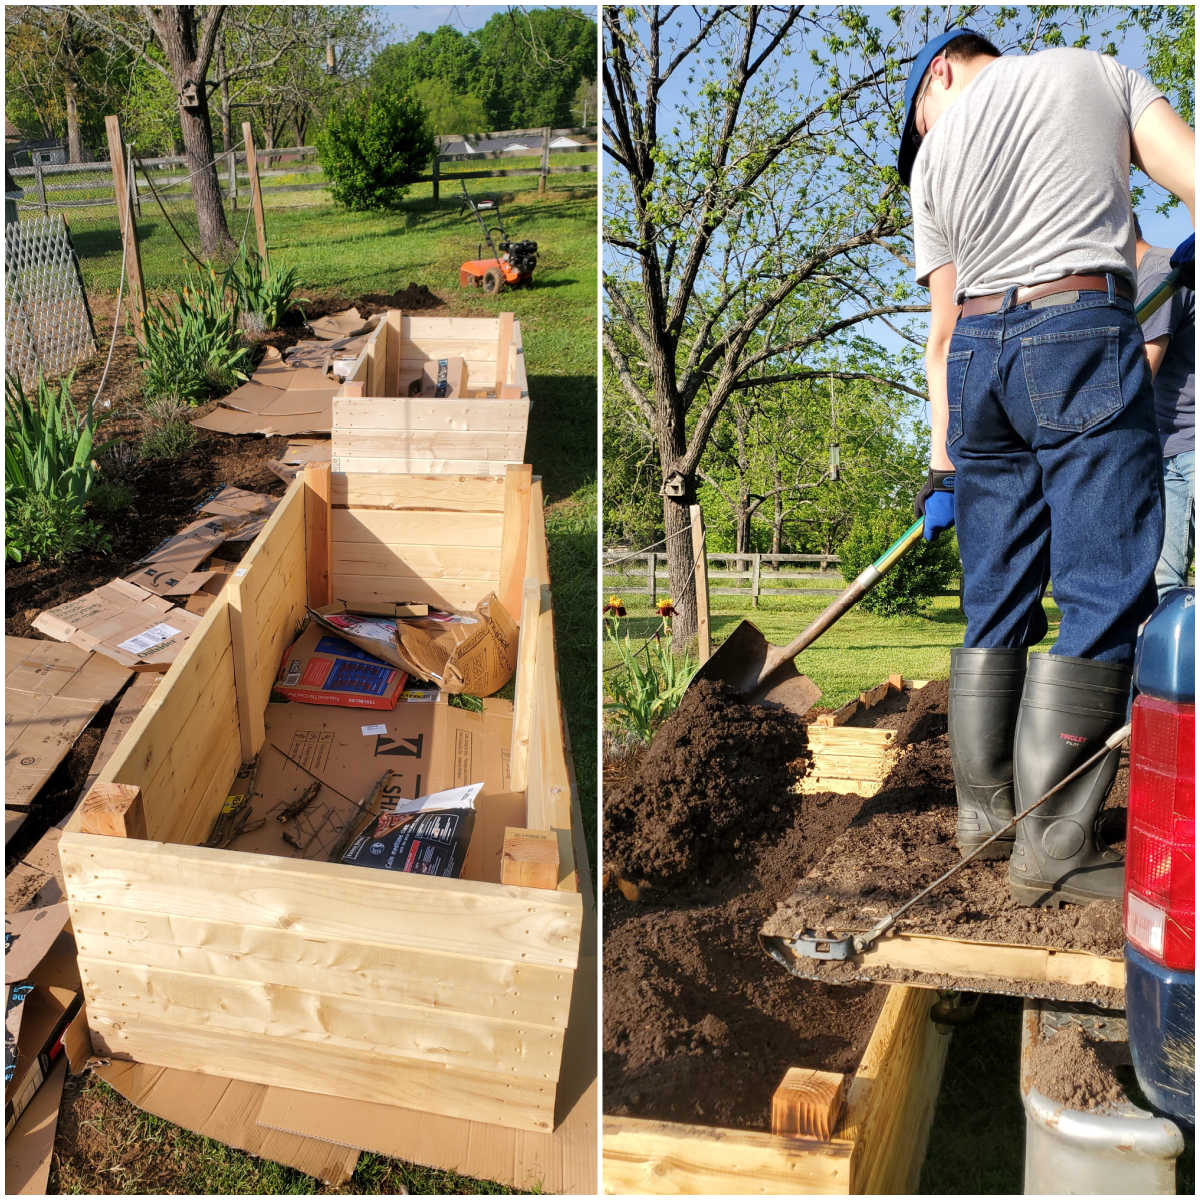 Pictures of DIY raised beds, putting soil into raised beds.